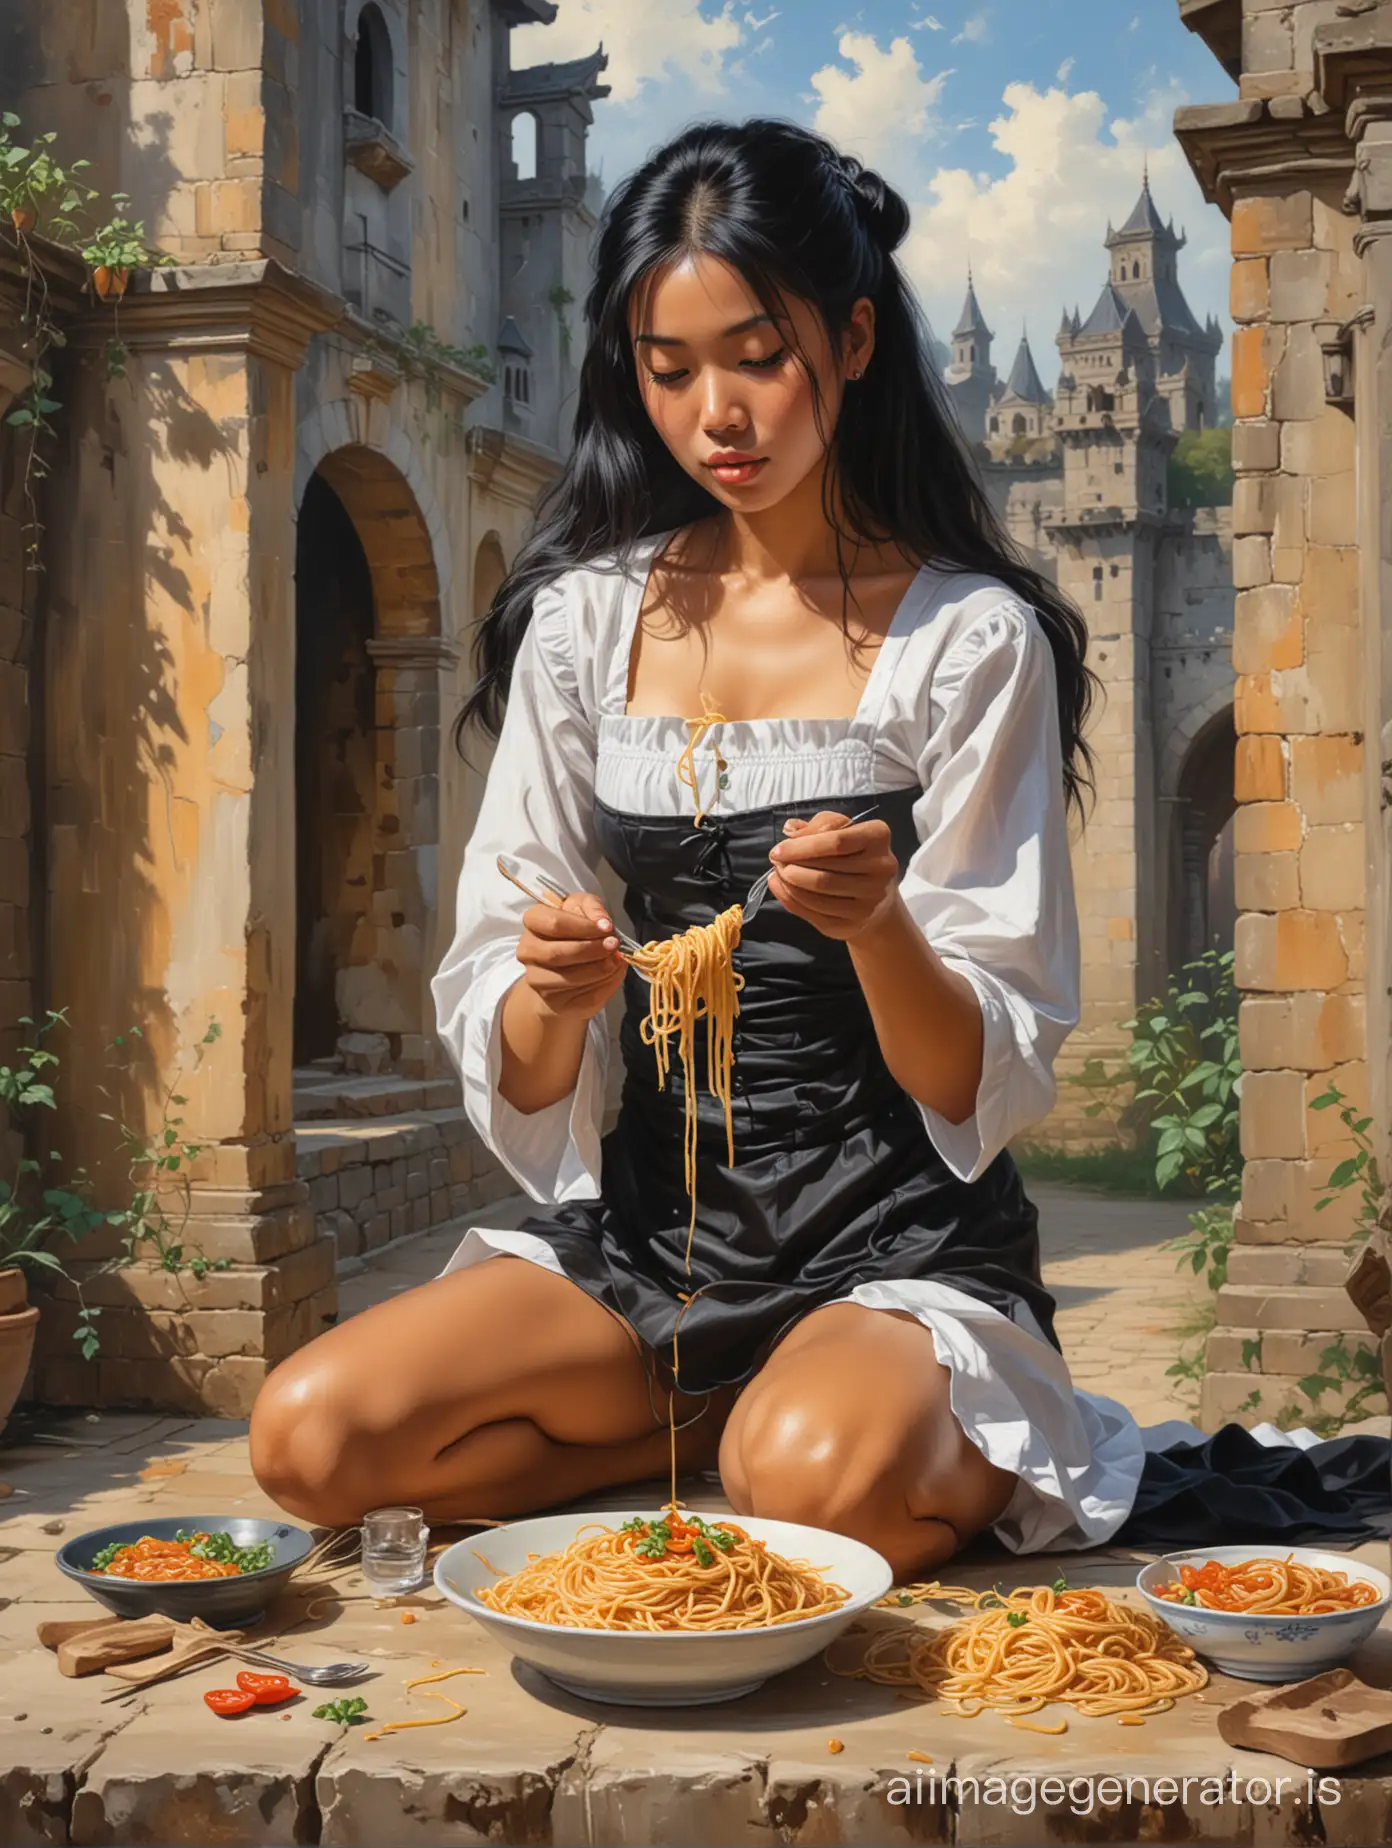 An oil painting of a beautiful tanned Vietnamese maid with long black hair and small breasts eating spaghetti in a castle